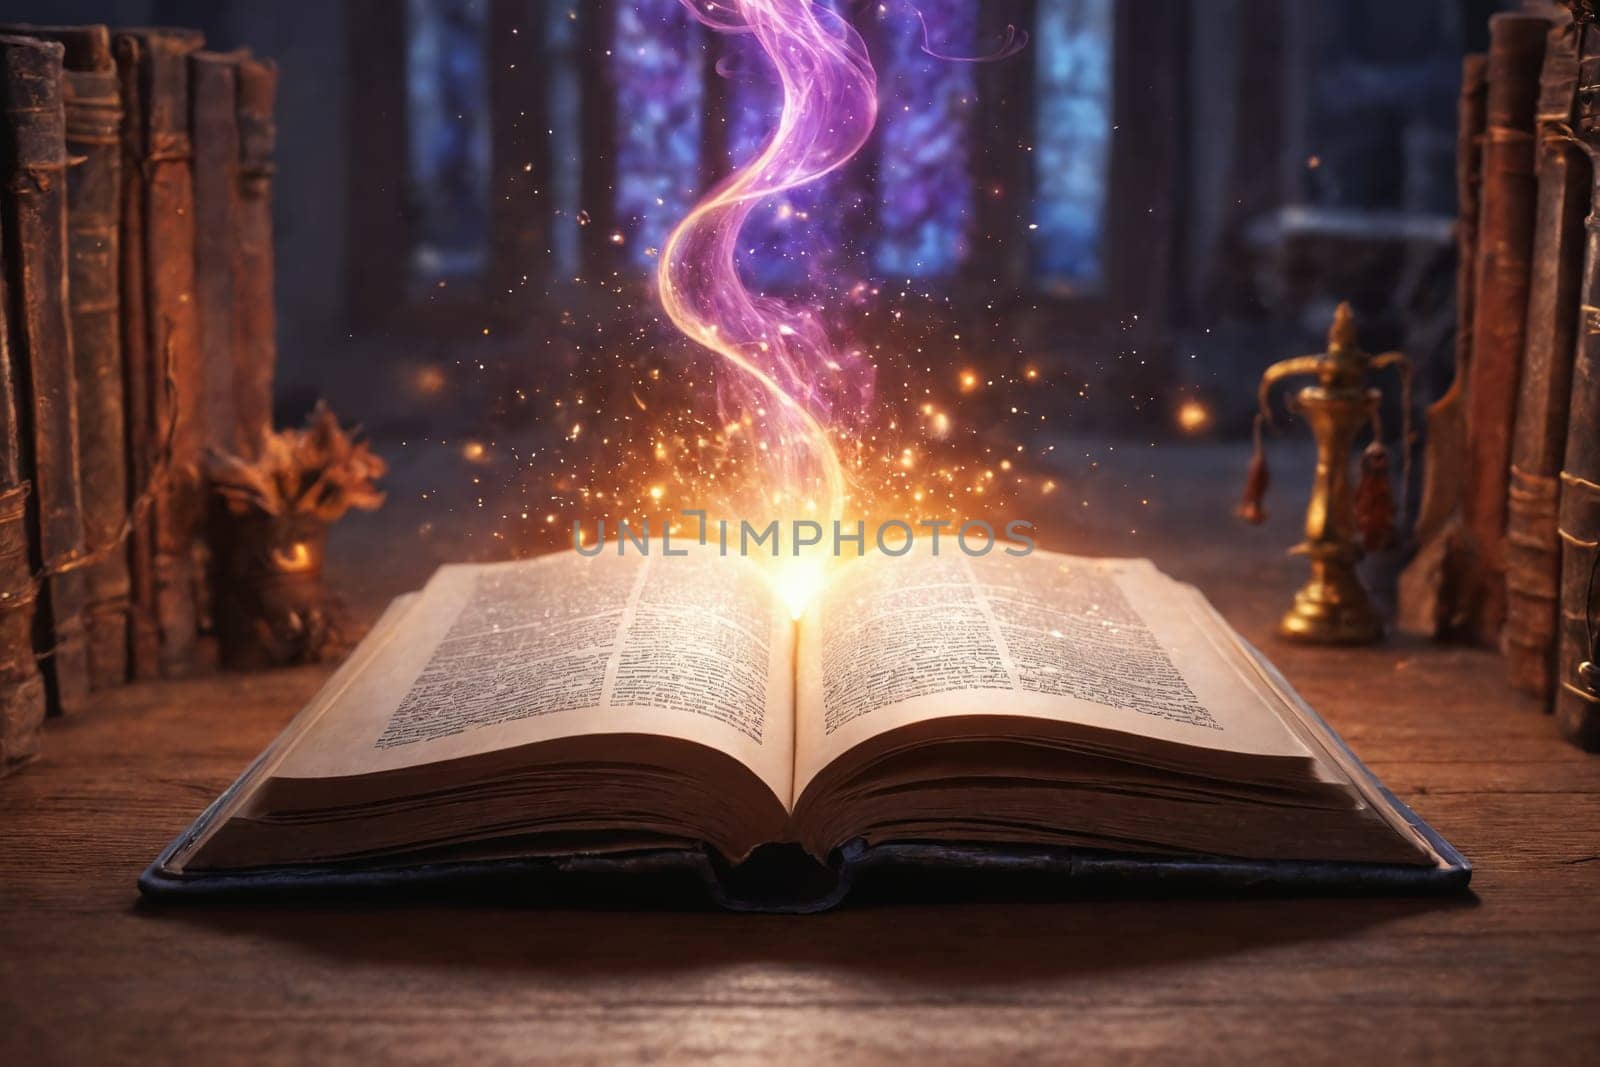 Depicting a magical book radiating an enchanting flame. Ideal visual metaphor for a thrilling, action-packed fantasy story.